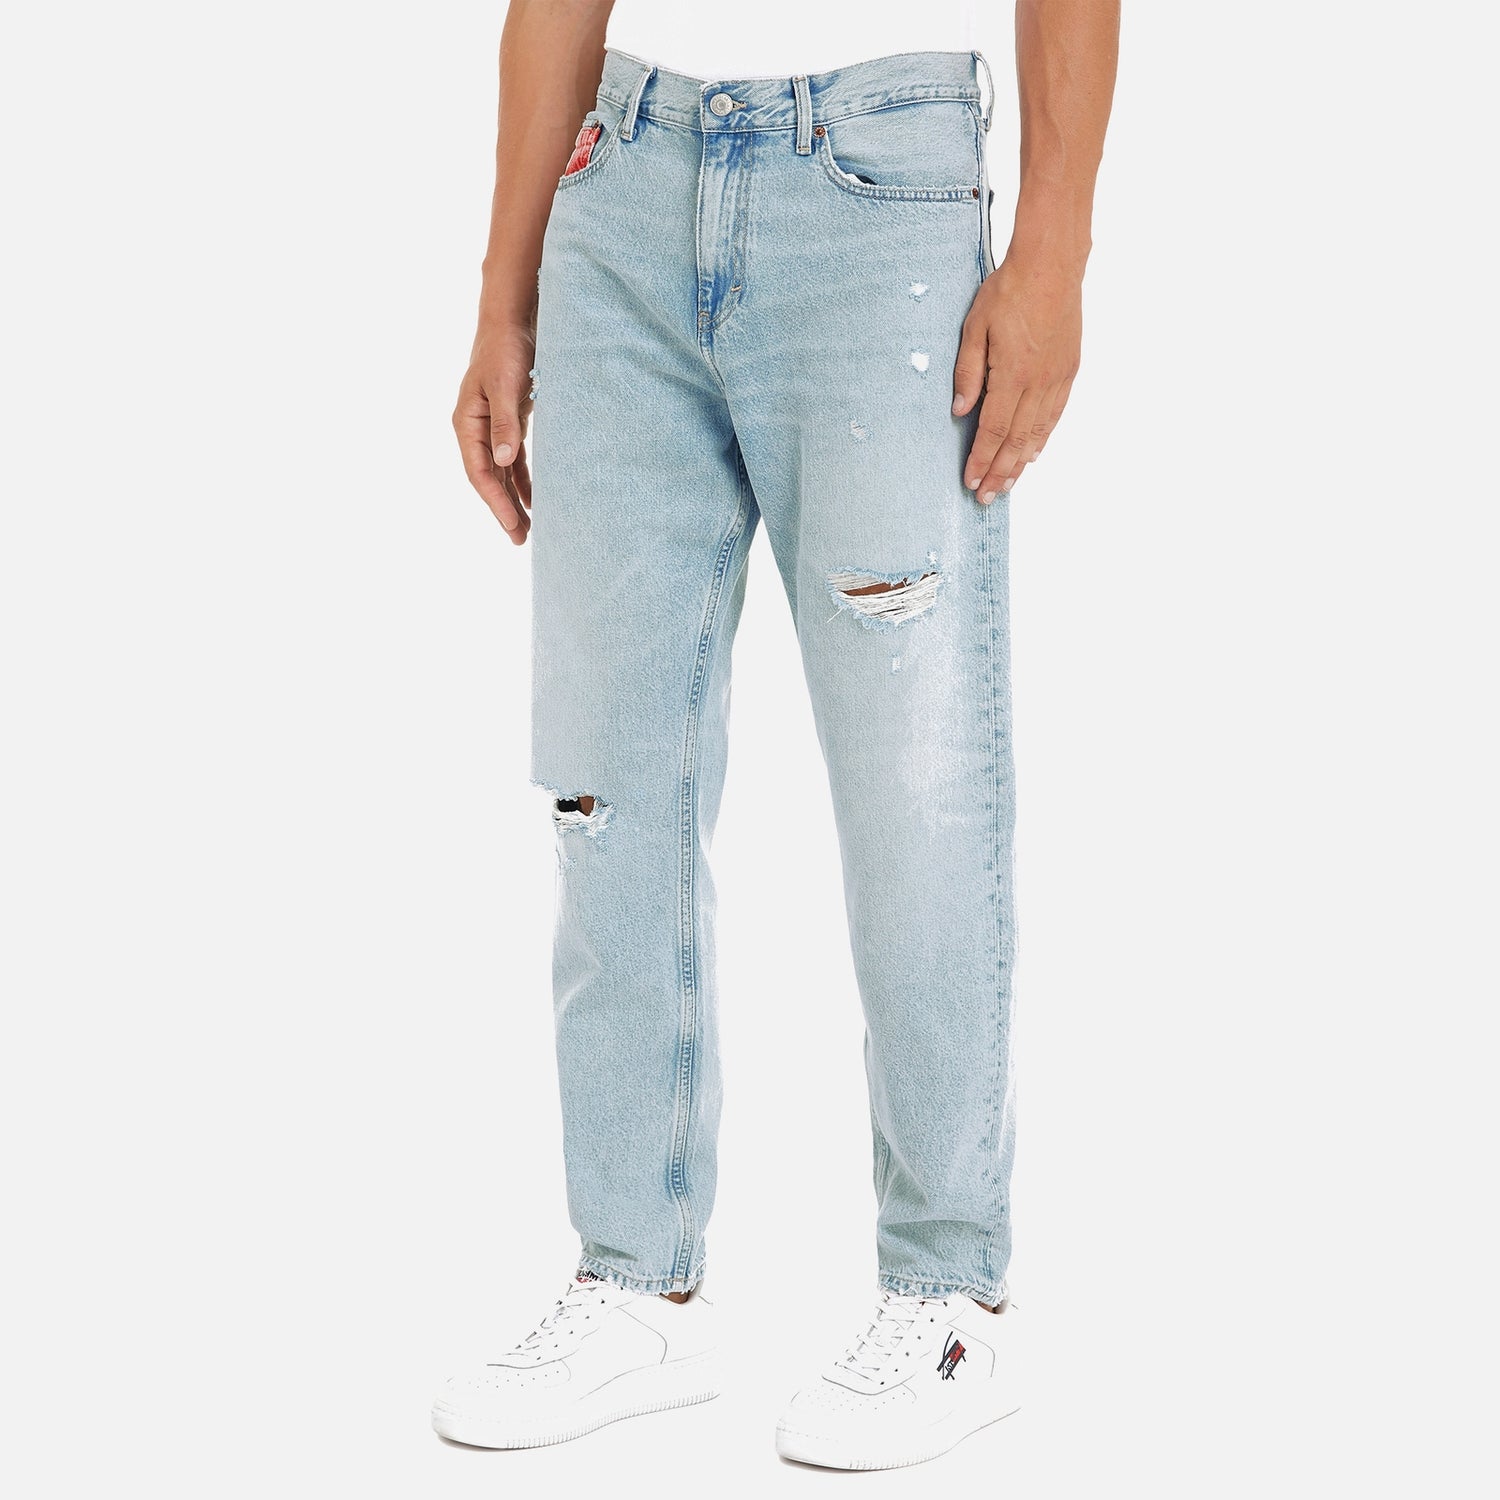 Tommy Jeans Isaac Archive Denim Jeans - W36/L32